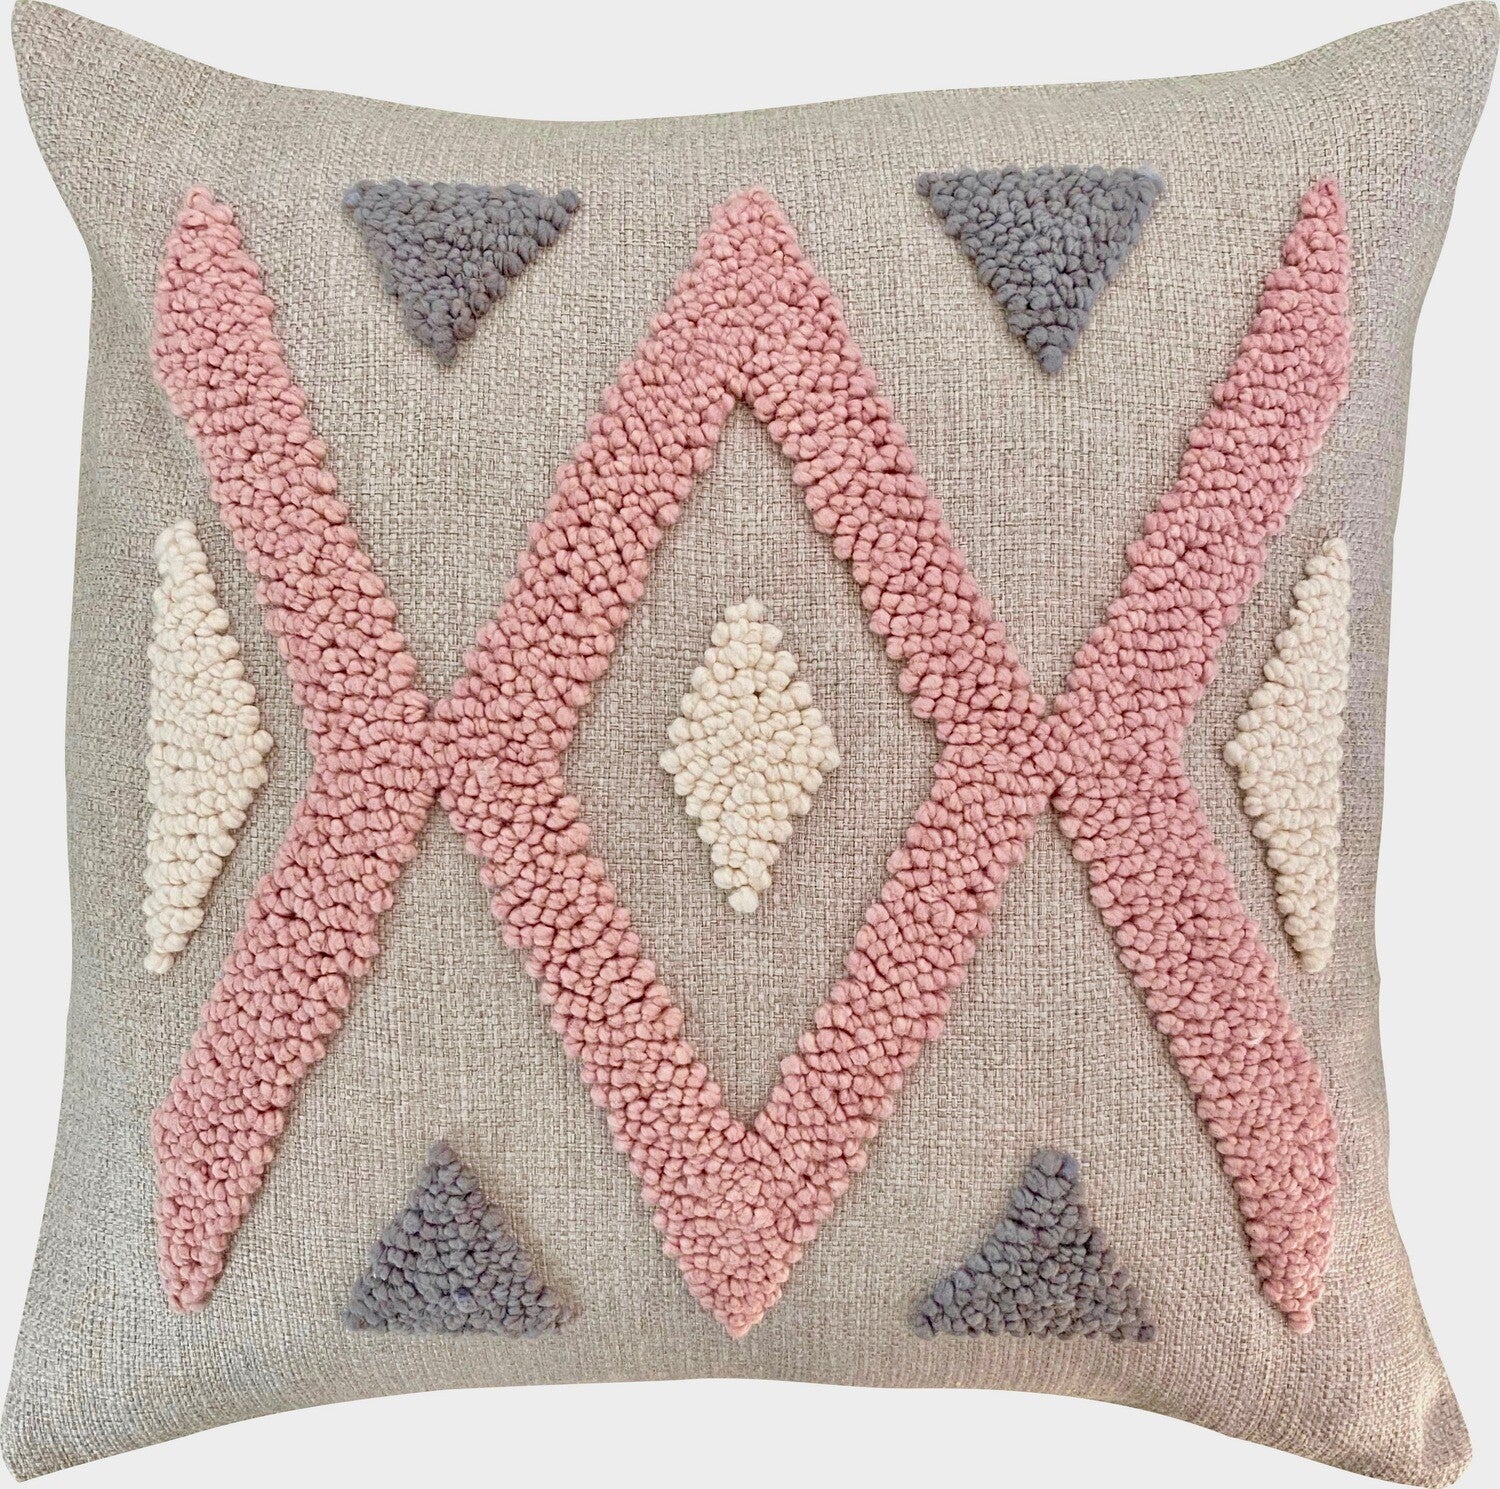 Scatter_Cushion_Punchneedle_African_Ndebele_Natural_Grey_Pink